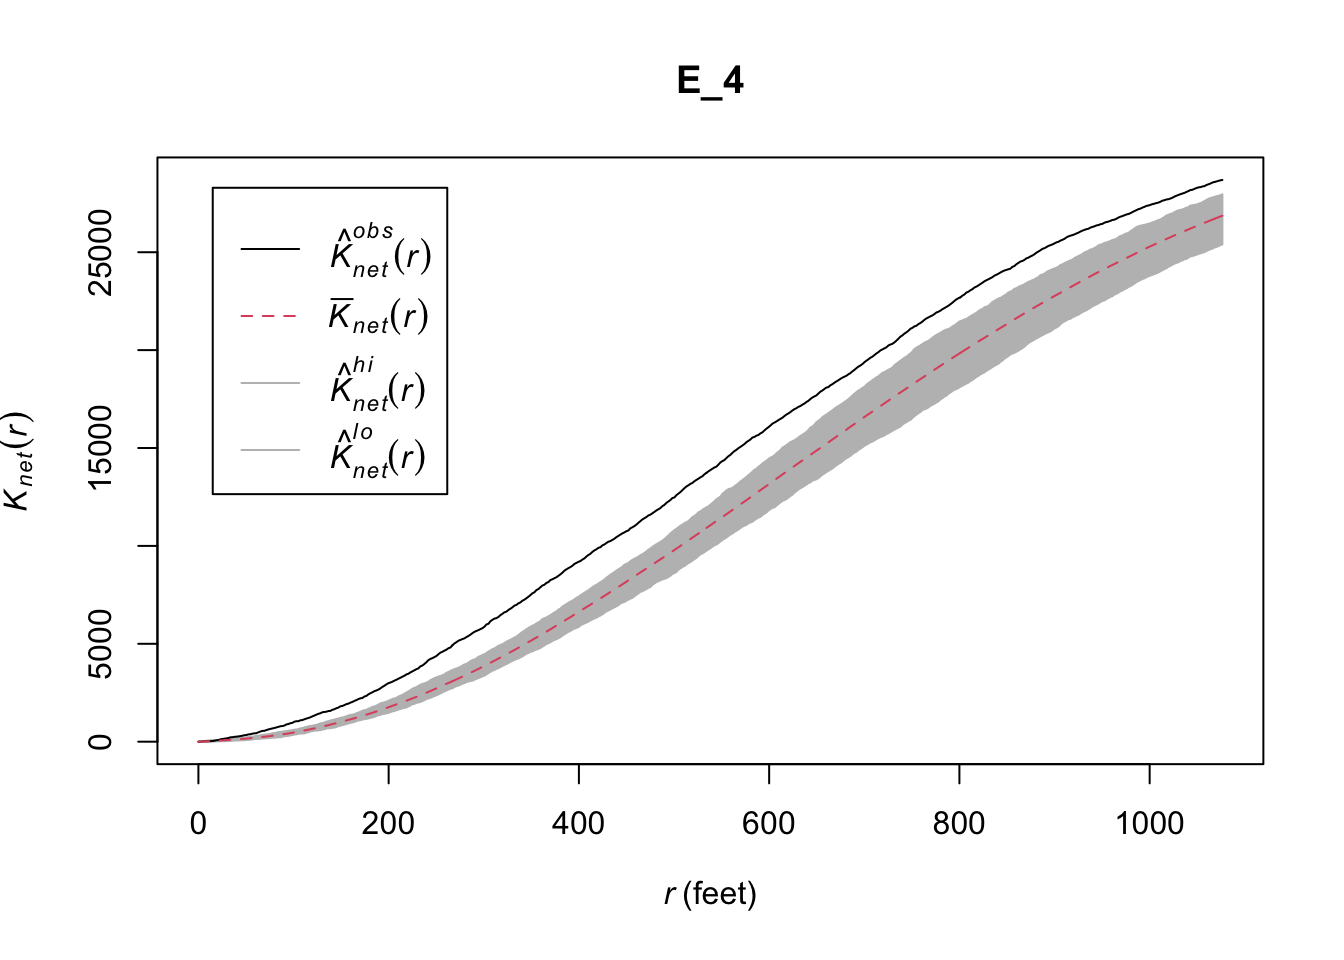 A slightly different plot from the previous ones, plotting 'K net of r' against 'r in feet', from zero to eleven hundred. Two curves appear, one of which is enveloped, however the envelope grows wider as r increases. Both curves are increasing, however their rate of increase slows near the middle of the plot. 'K hat obs of r' is slightly above 'K bar net of r', and manages to stay above its envelope as well.